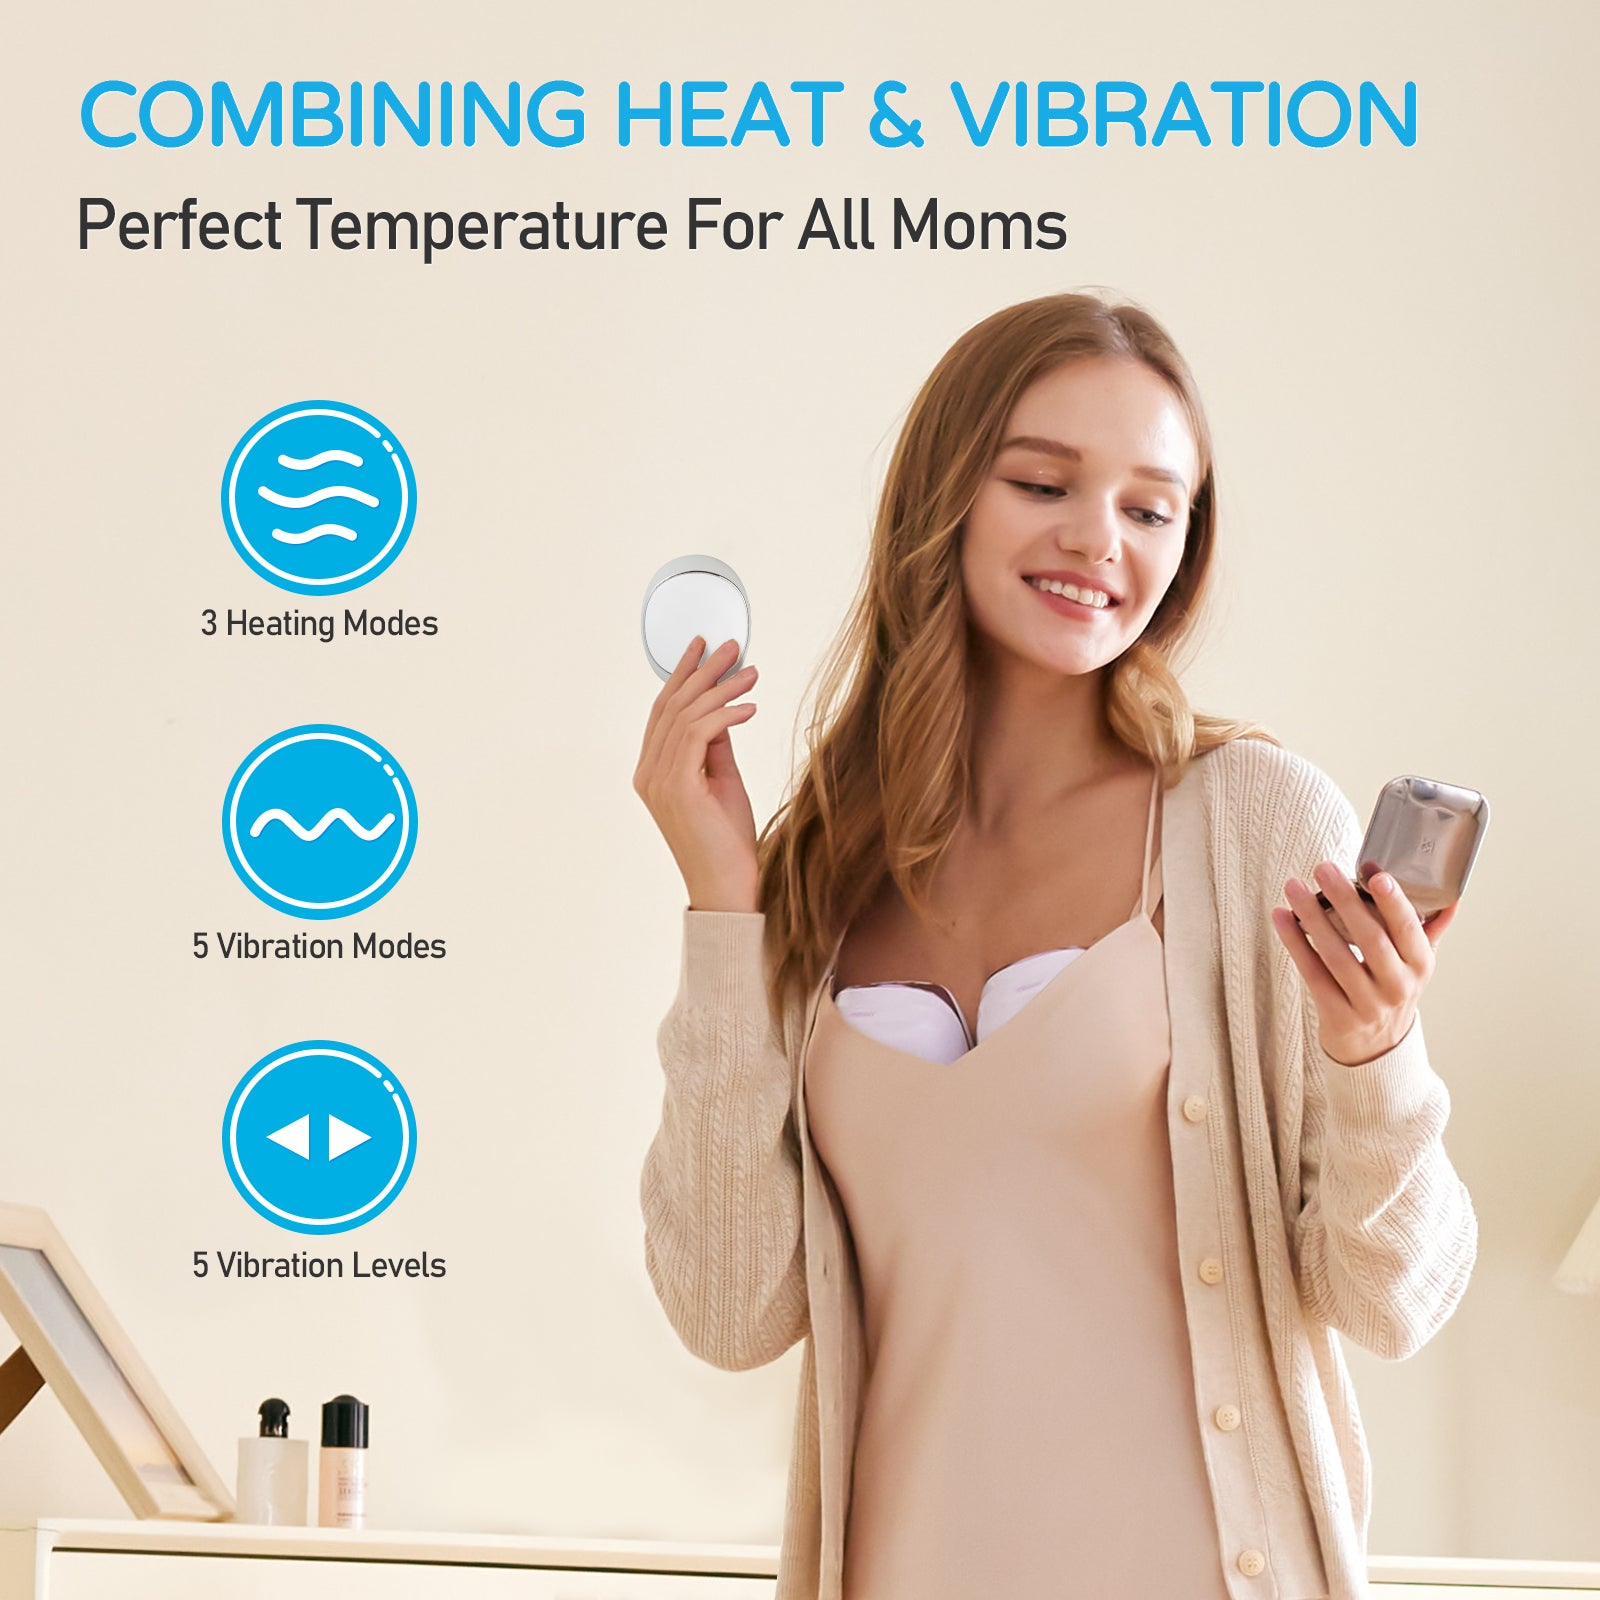 Warming Lactation Massager Waterproof Breast Massager for Breastfeeding 10  Vibration Mode and Heat Support for Clogged Ducts